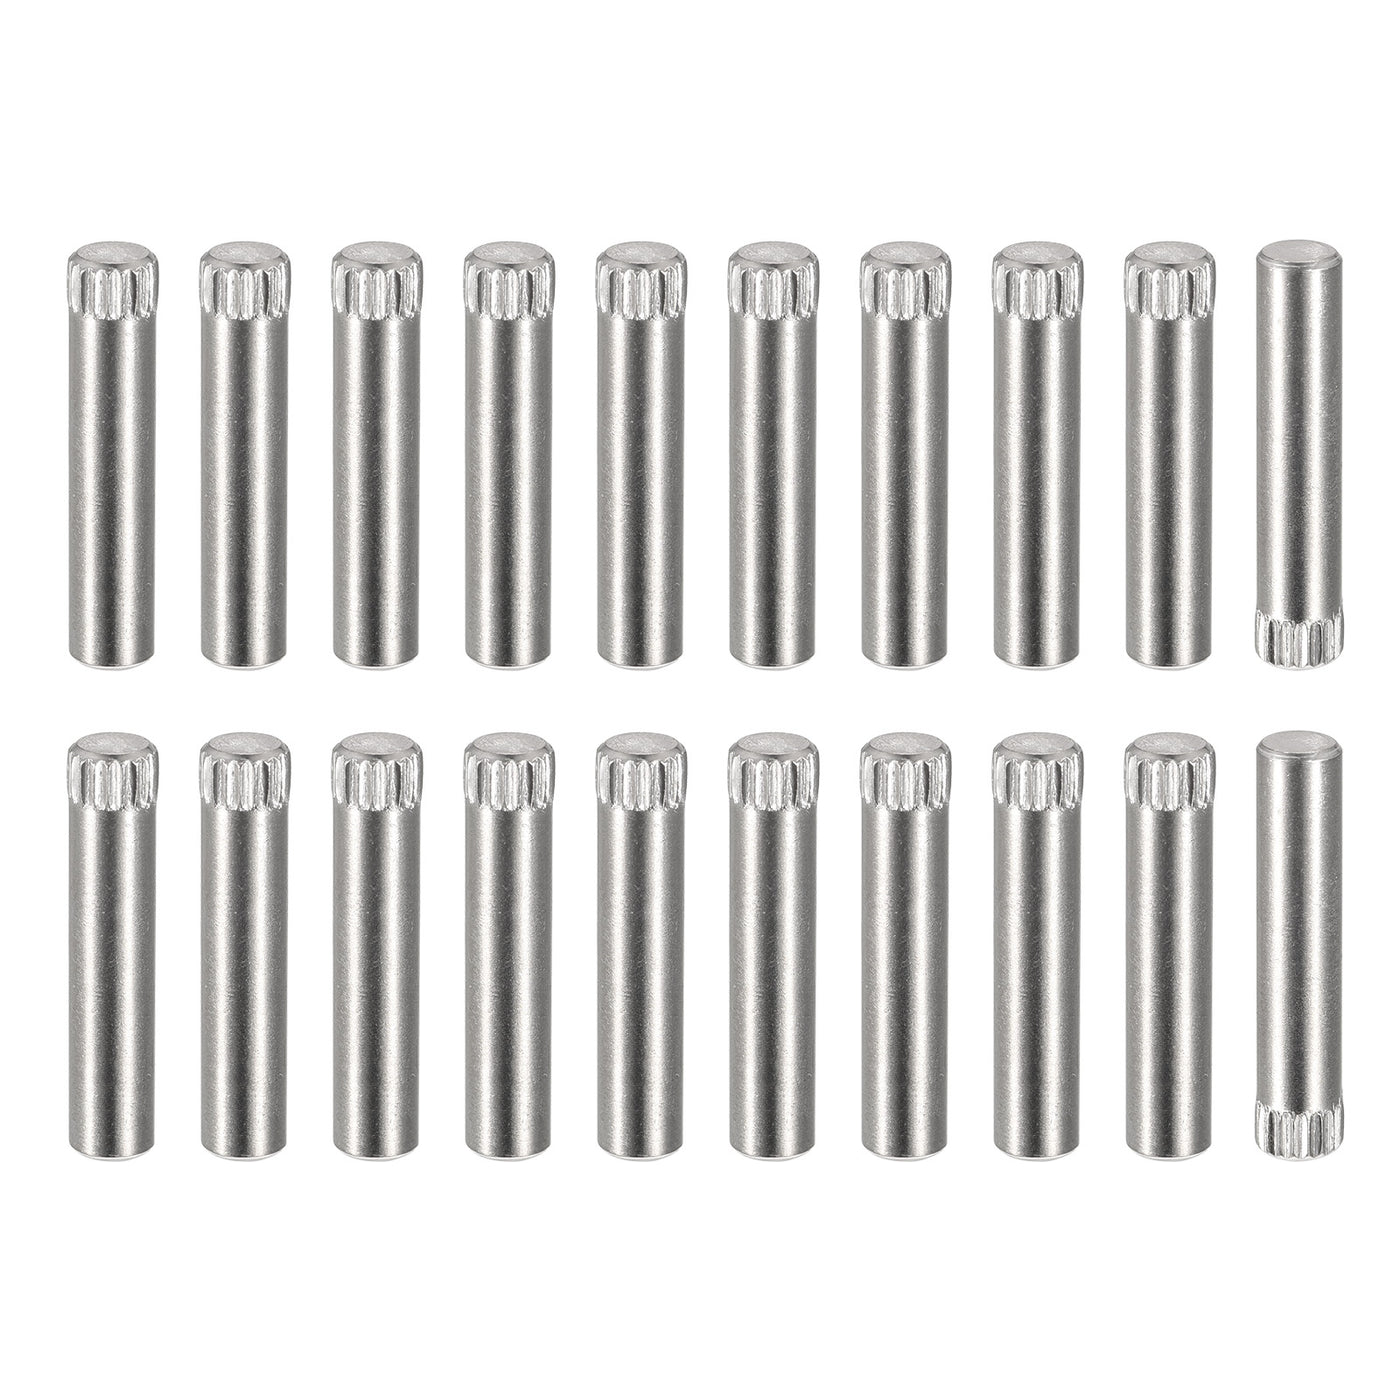 uxcell Uxcell 5x25mm 304 Stainless Steel Dowel Pins, 20Pcs Knurled Head Flat End Dowel Pin